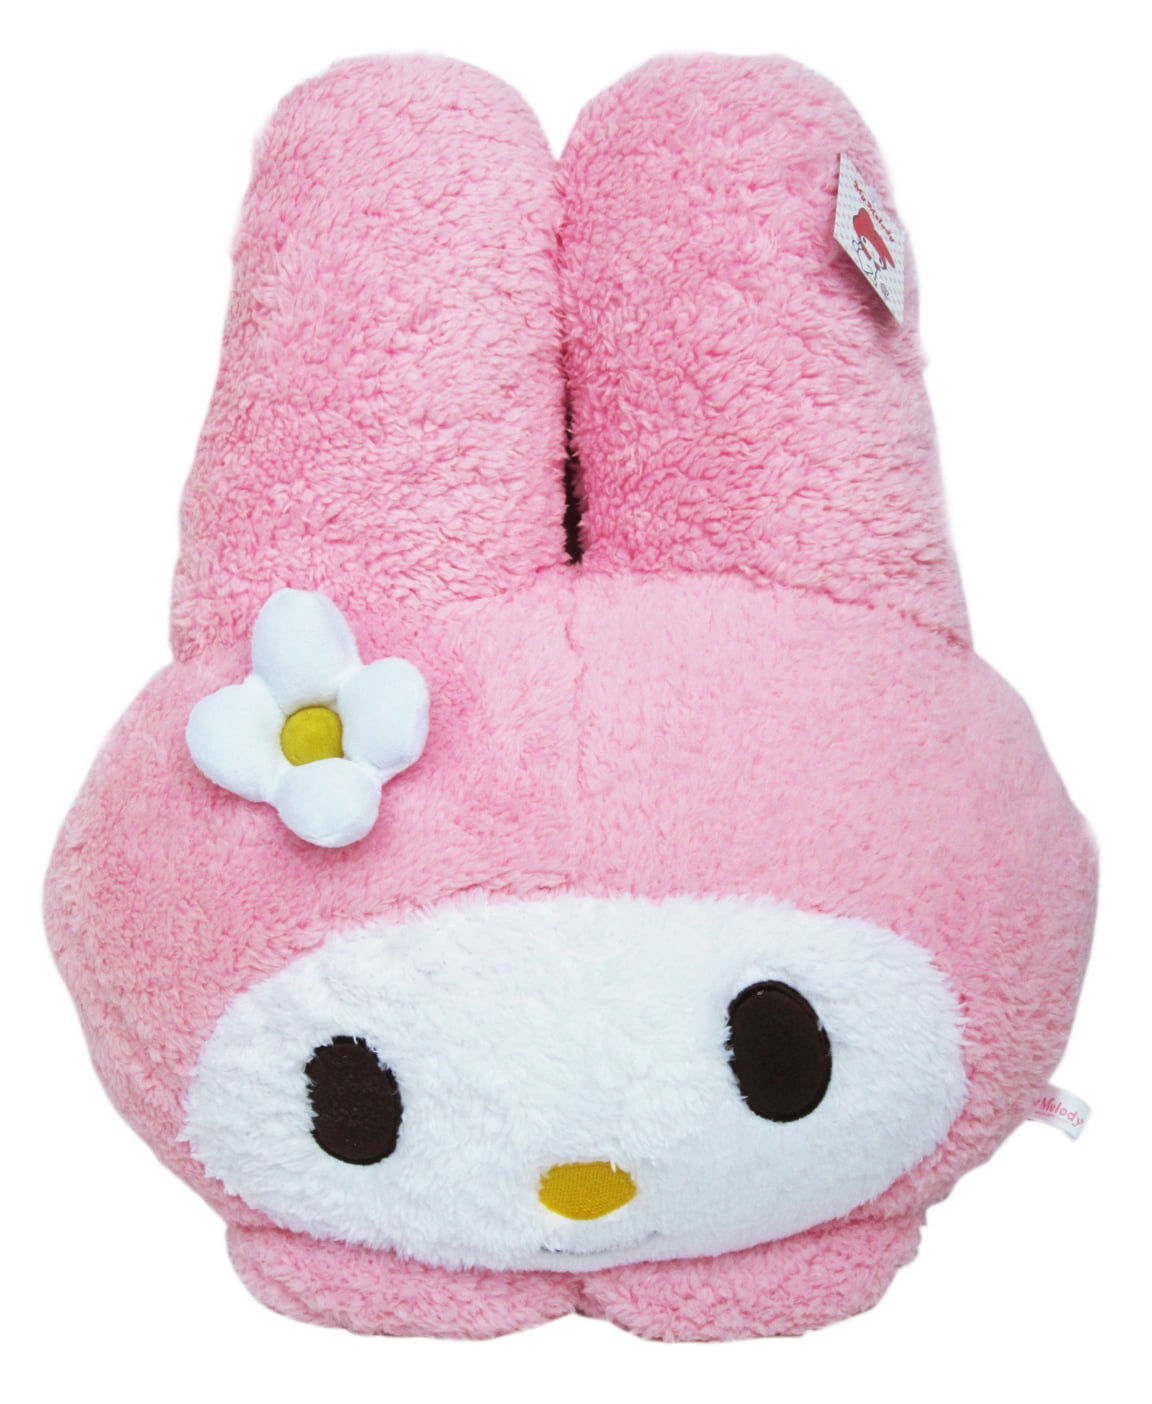 Sanrio's My Melody Head Pink Plush Pillow/Toy (17in) - Walmart.com ...